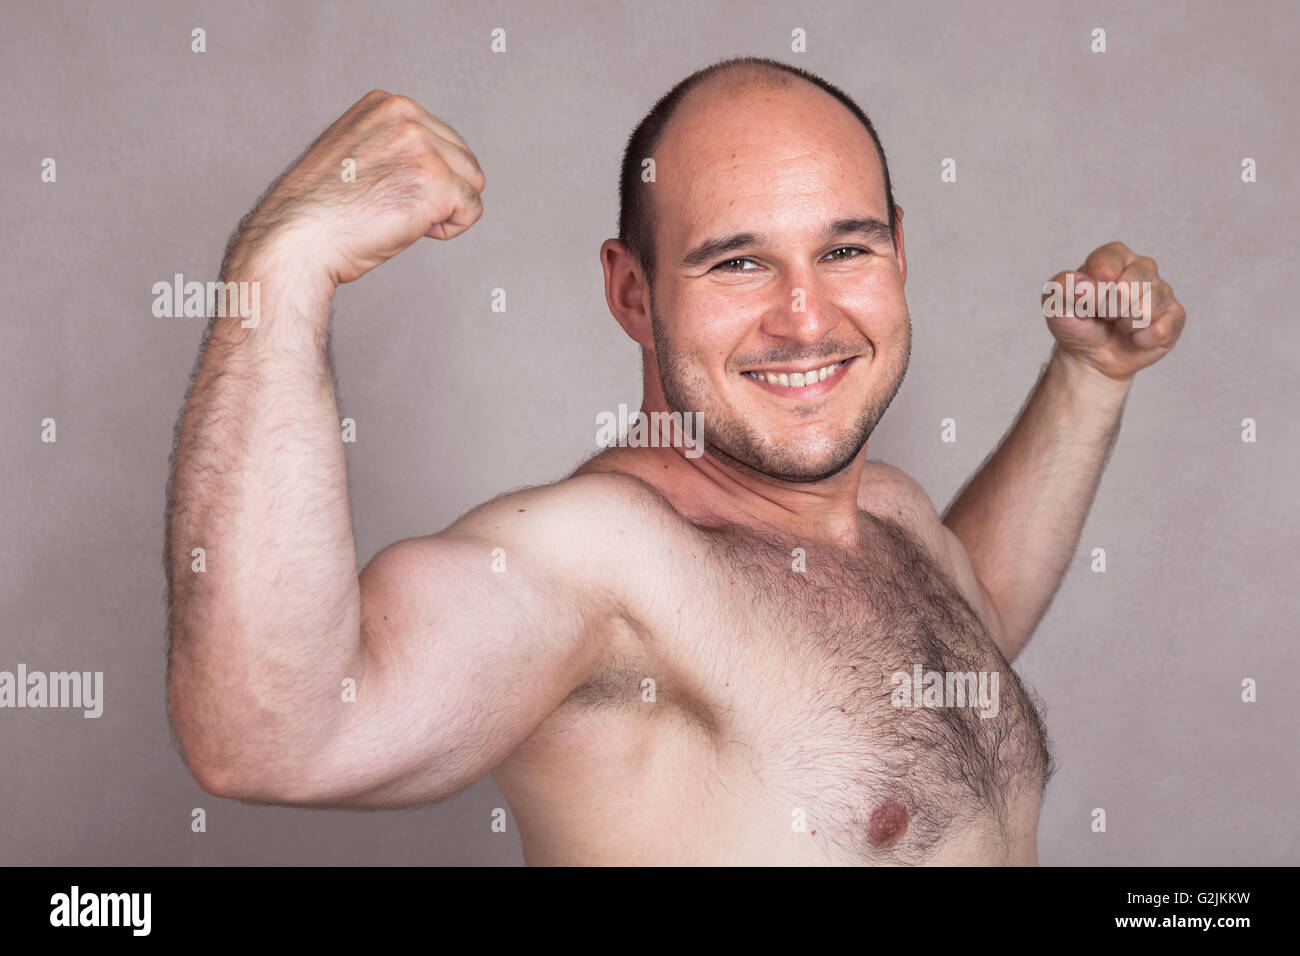 Closeup of happy shirtless man showing his strong arms and muscles. Stock Photo